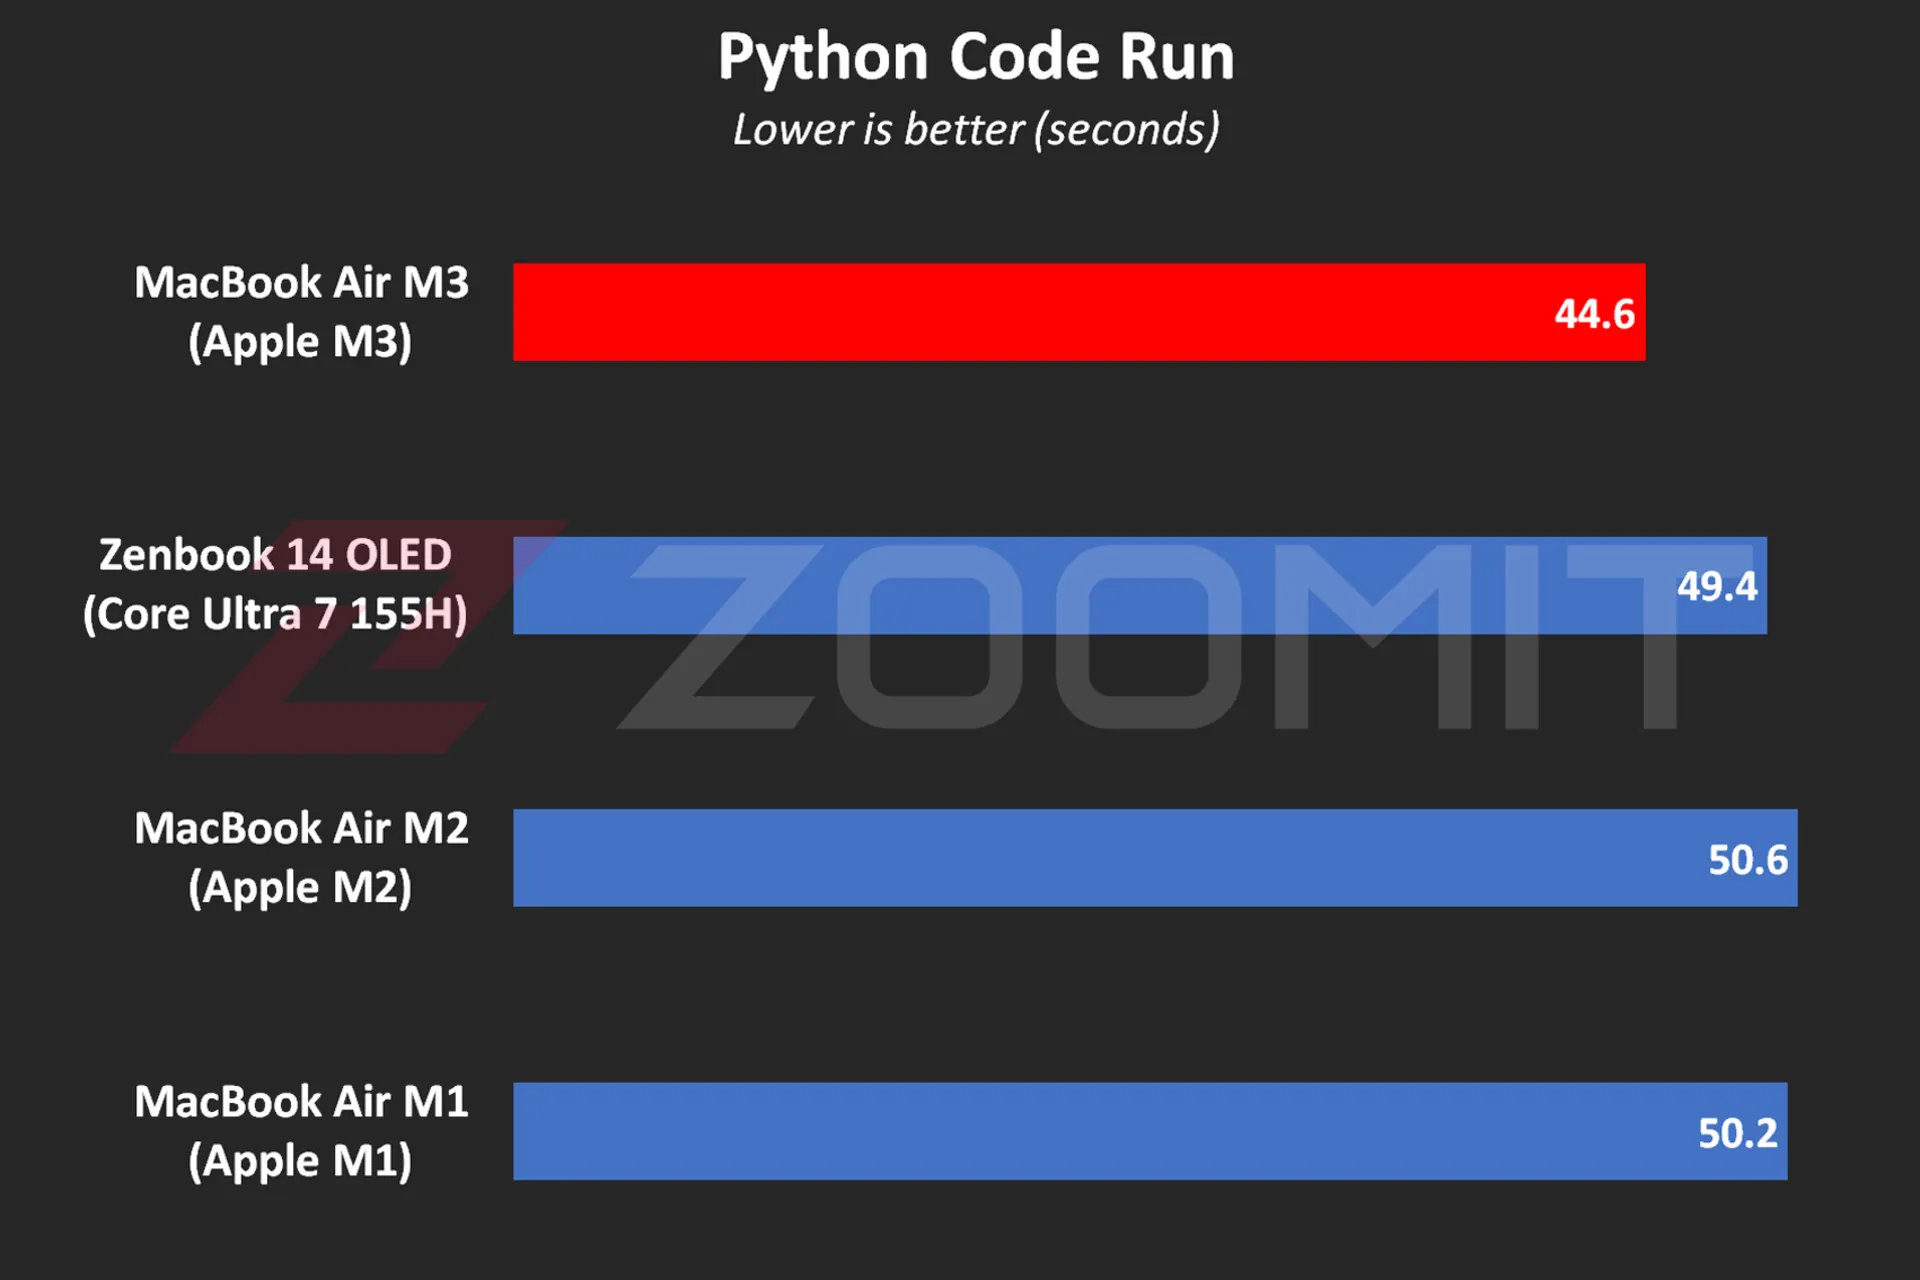 Macbook Air M3 performance in Python code execution